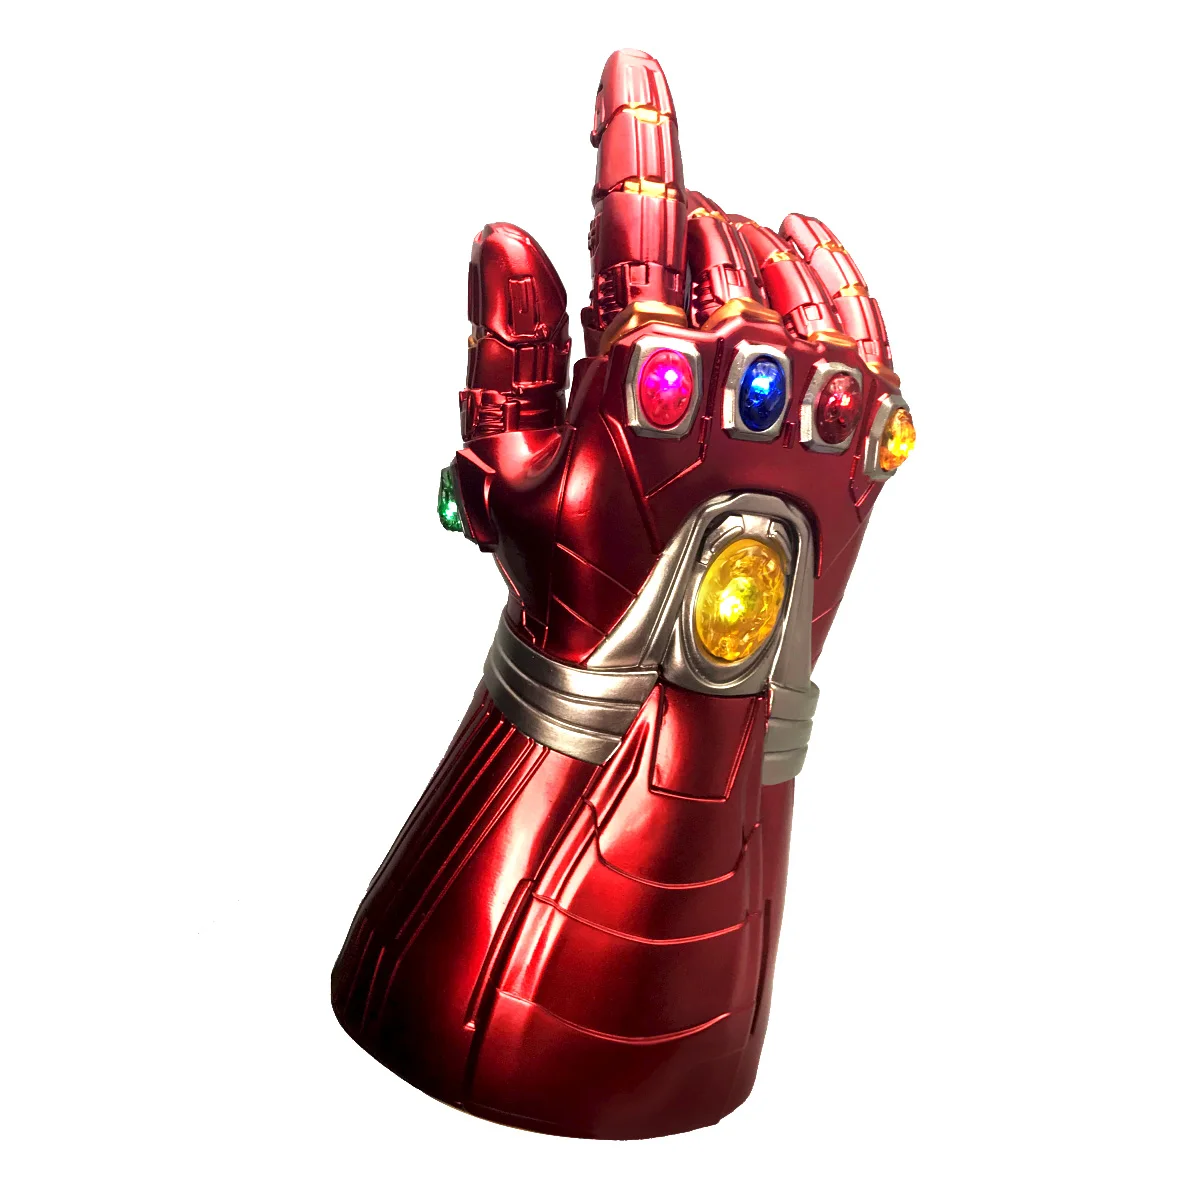 Kinder Thanos Handschuh Infinity Gauntlet LED Licht Avengers 4 Cosplay Toy Gift 